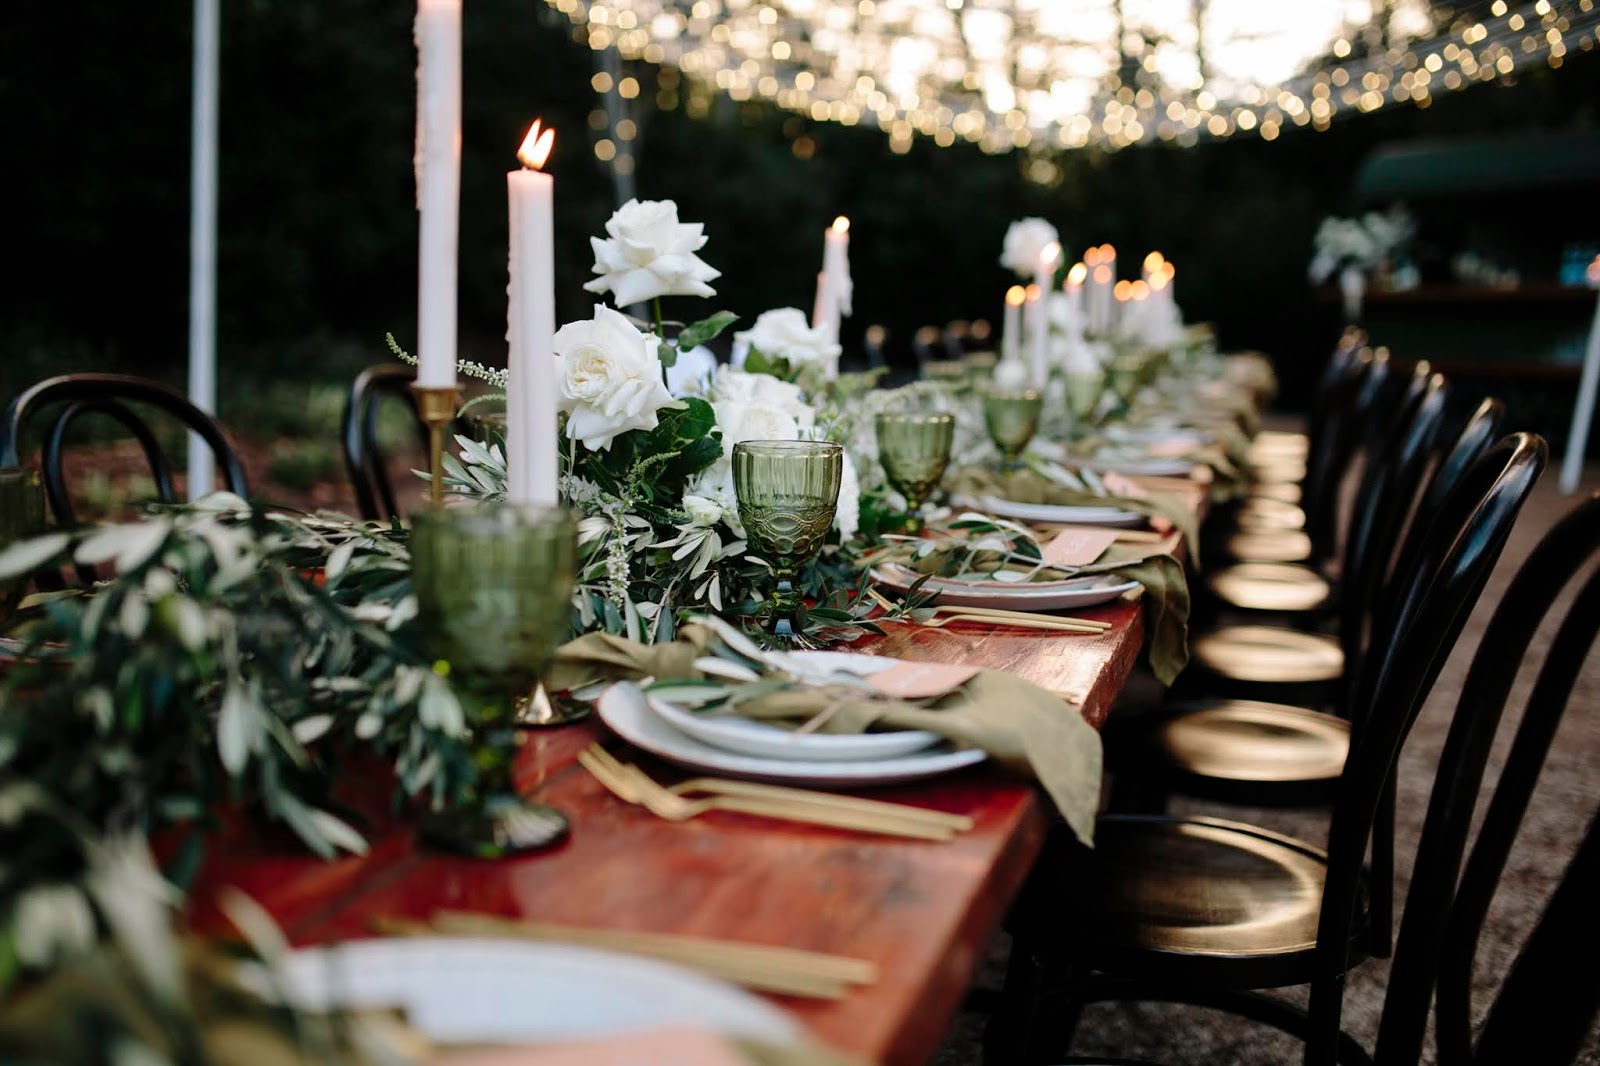 jennifer burch photography to the aisle australia outdoor weddings fairy light canopy floral design styling